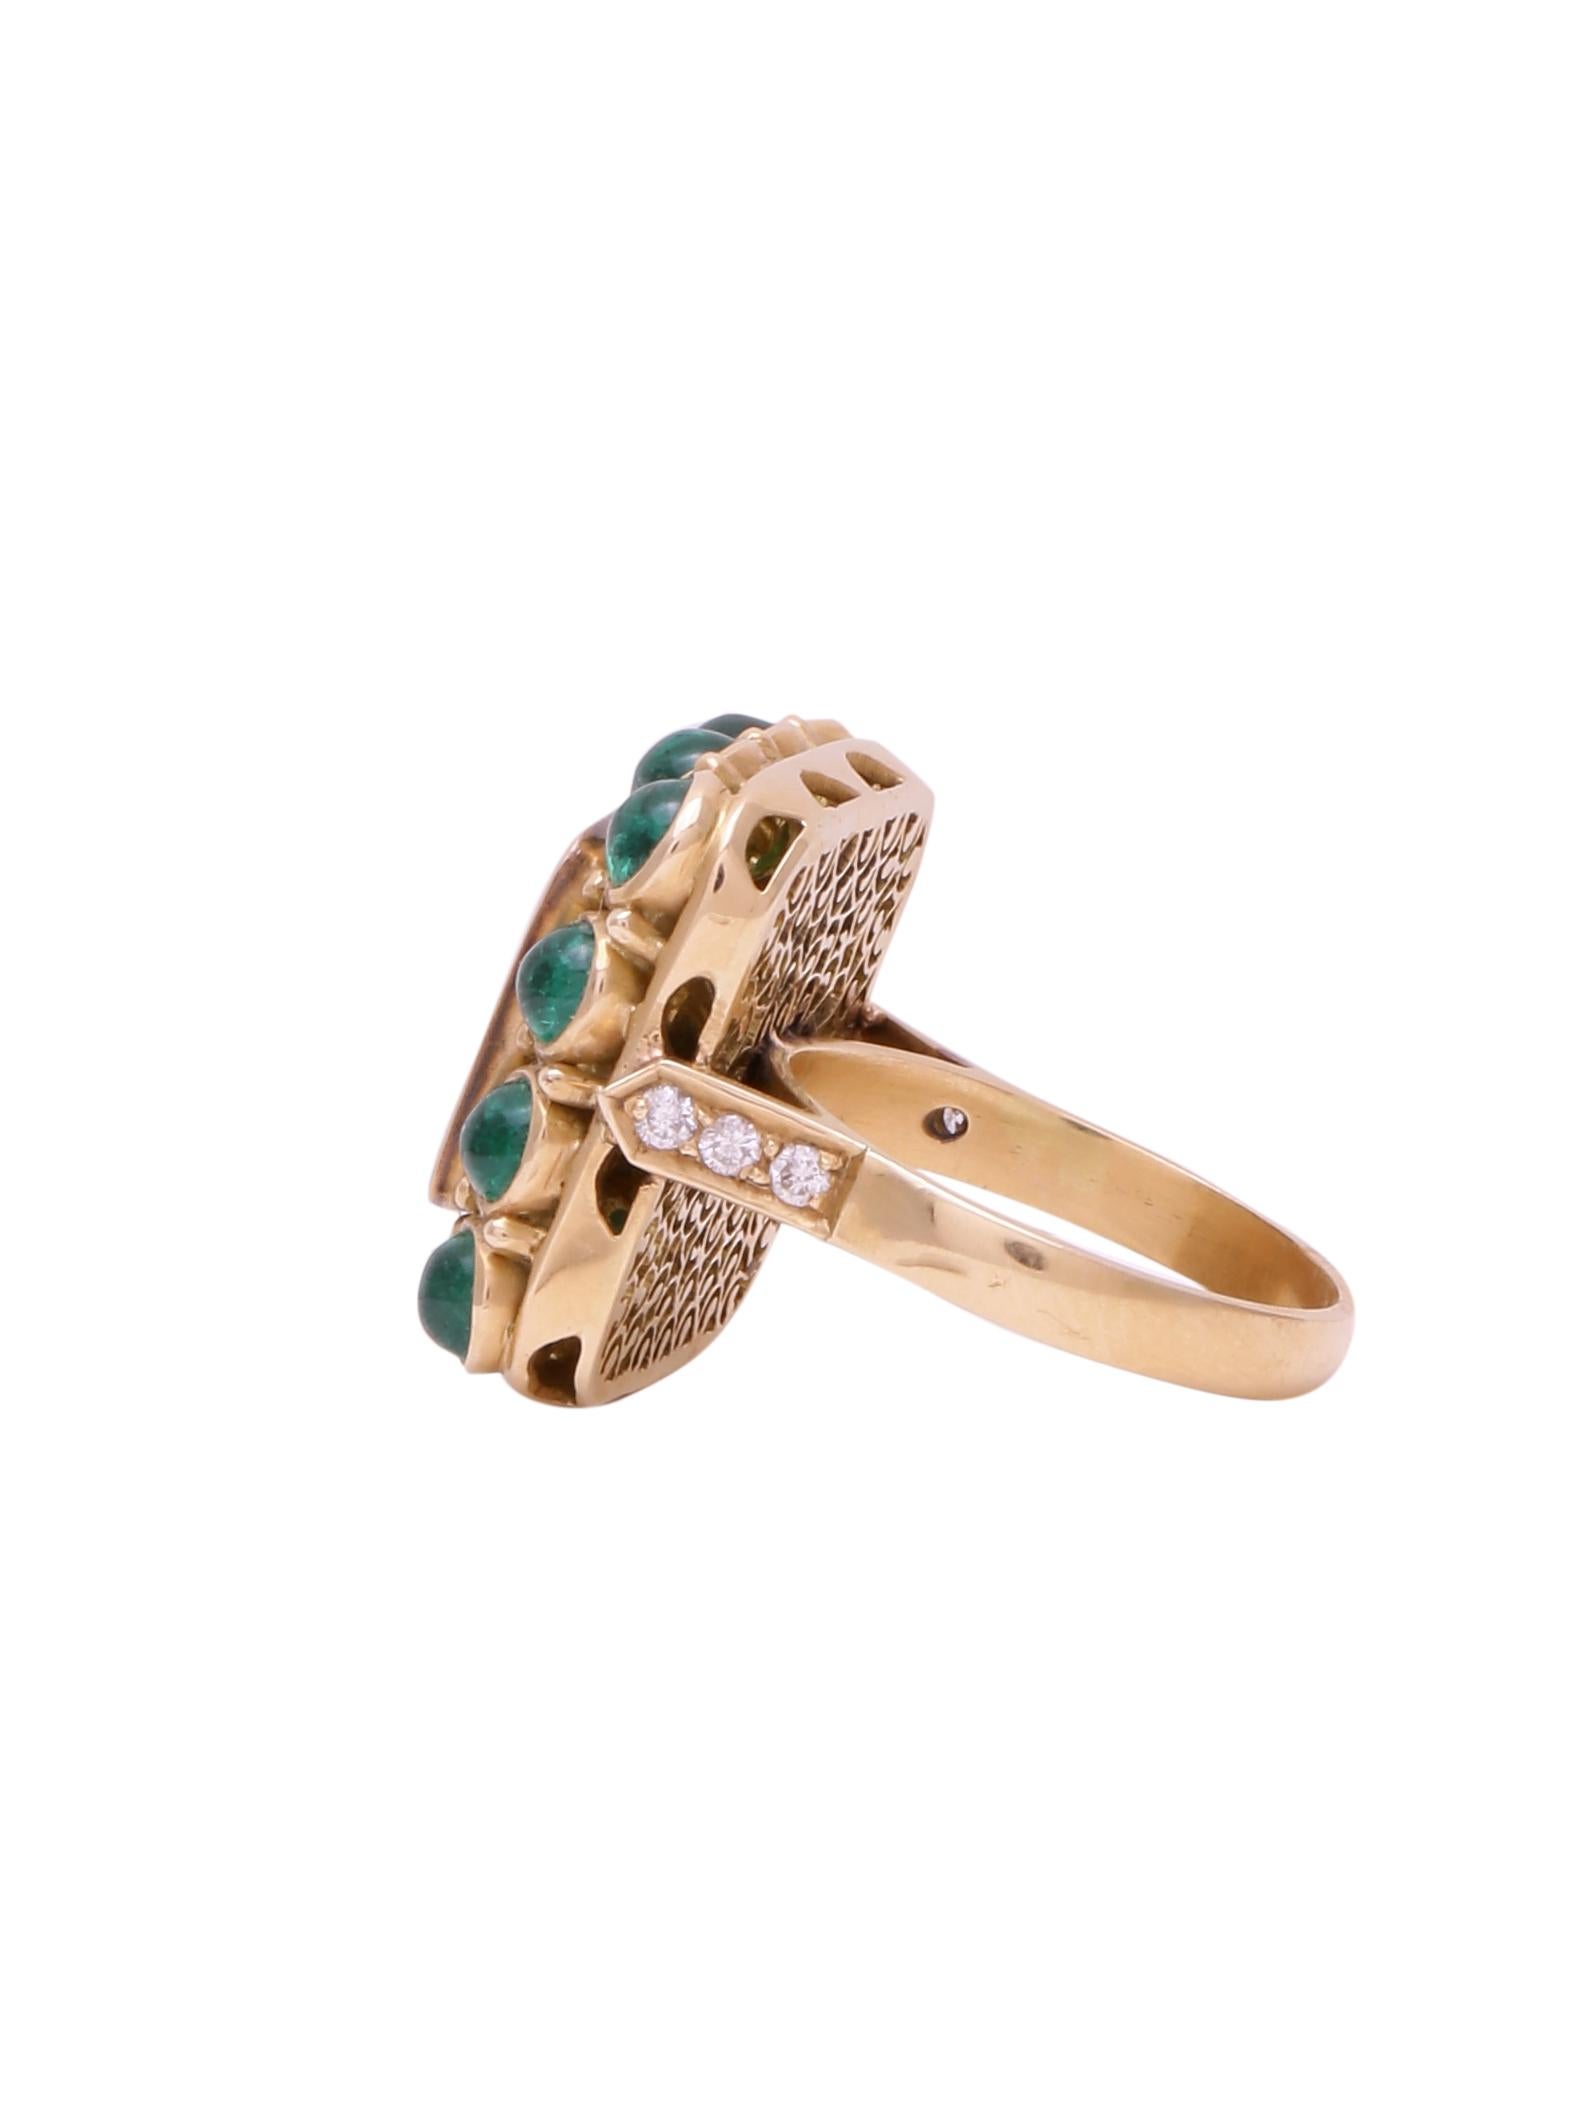 Rose Cut 2.24 cts Diamond Rosecut and Emerald Round Cabochon Ring Handcrafted in 18k Gold For Sale